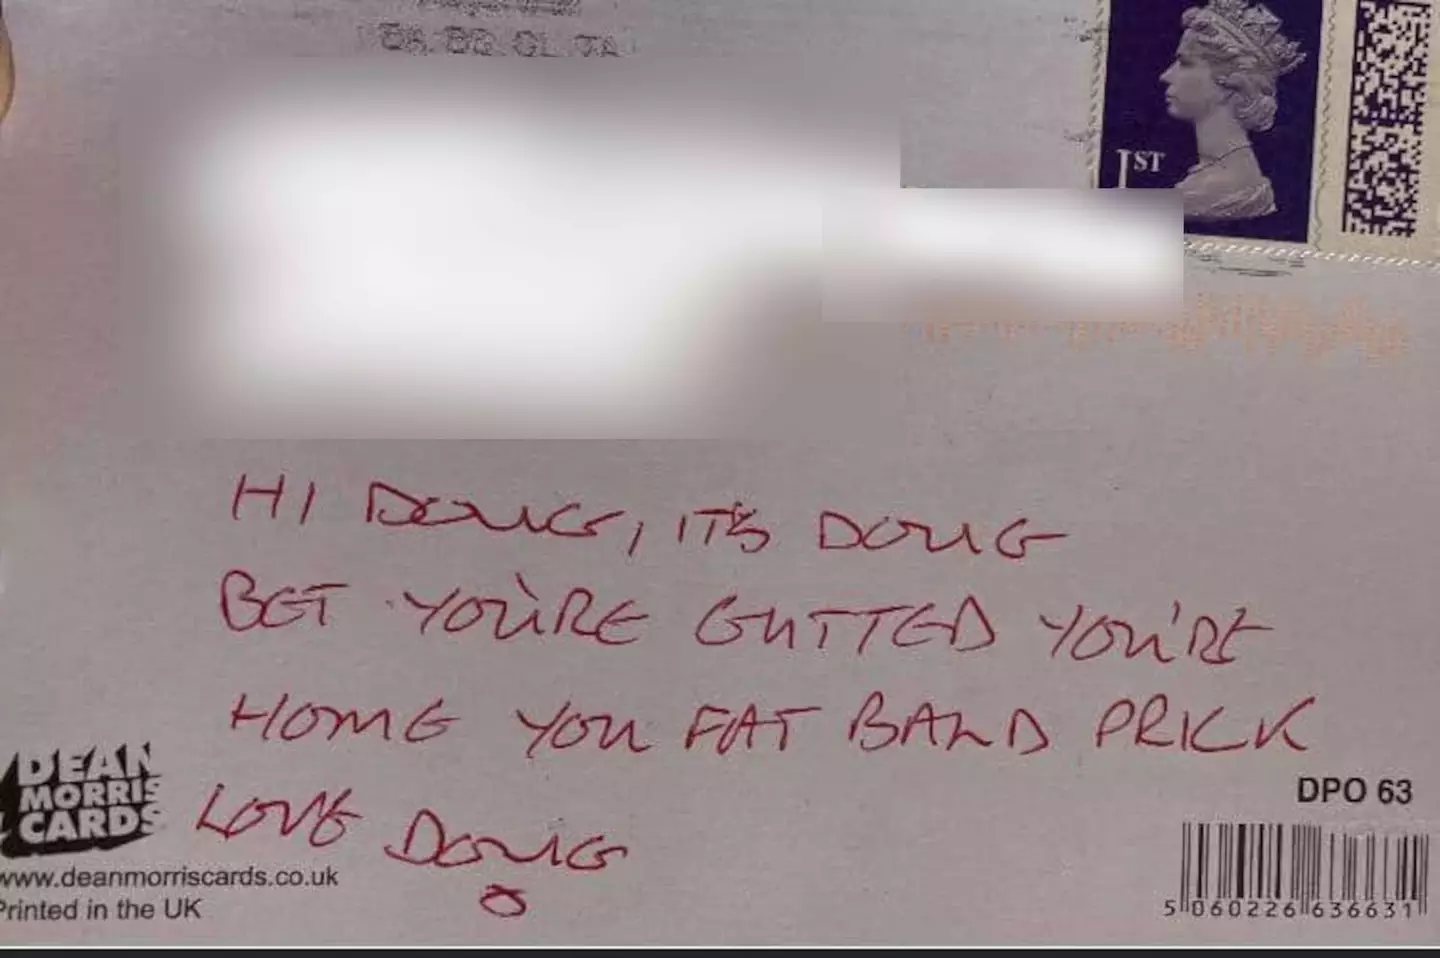 The infamous postcard.